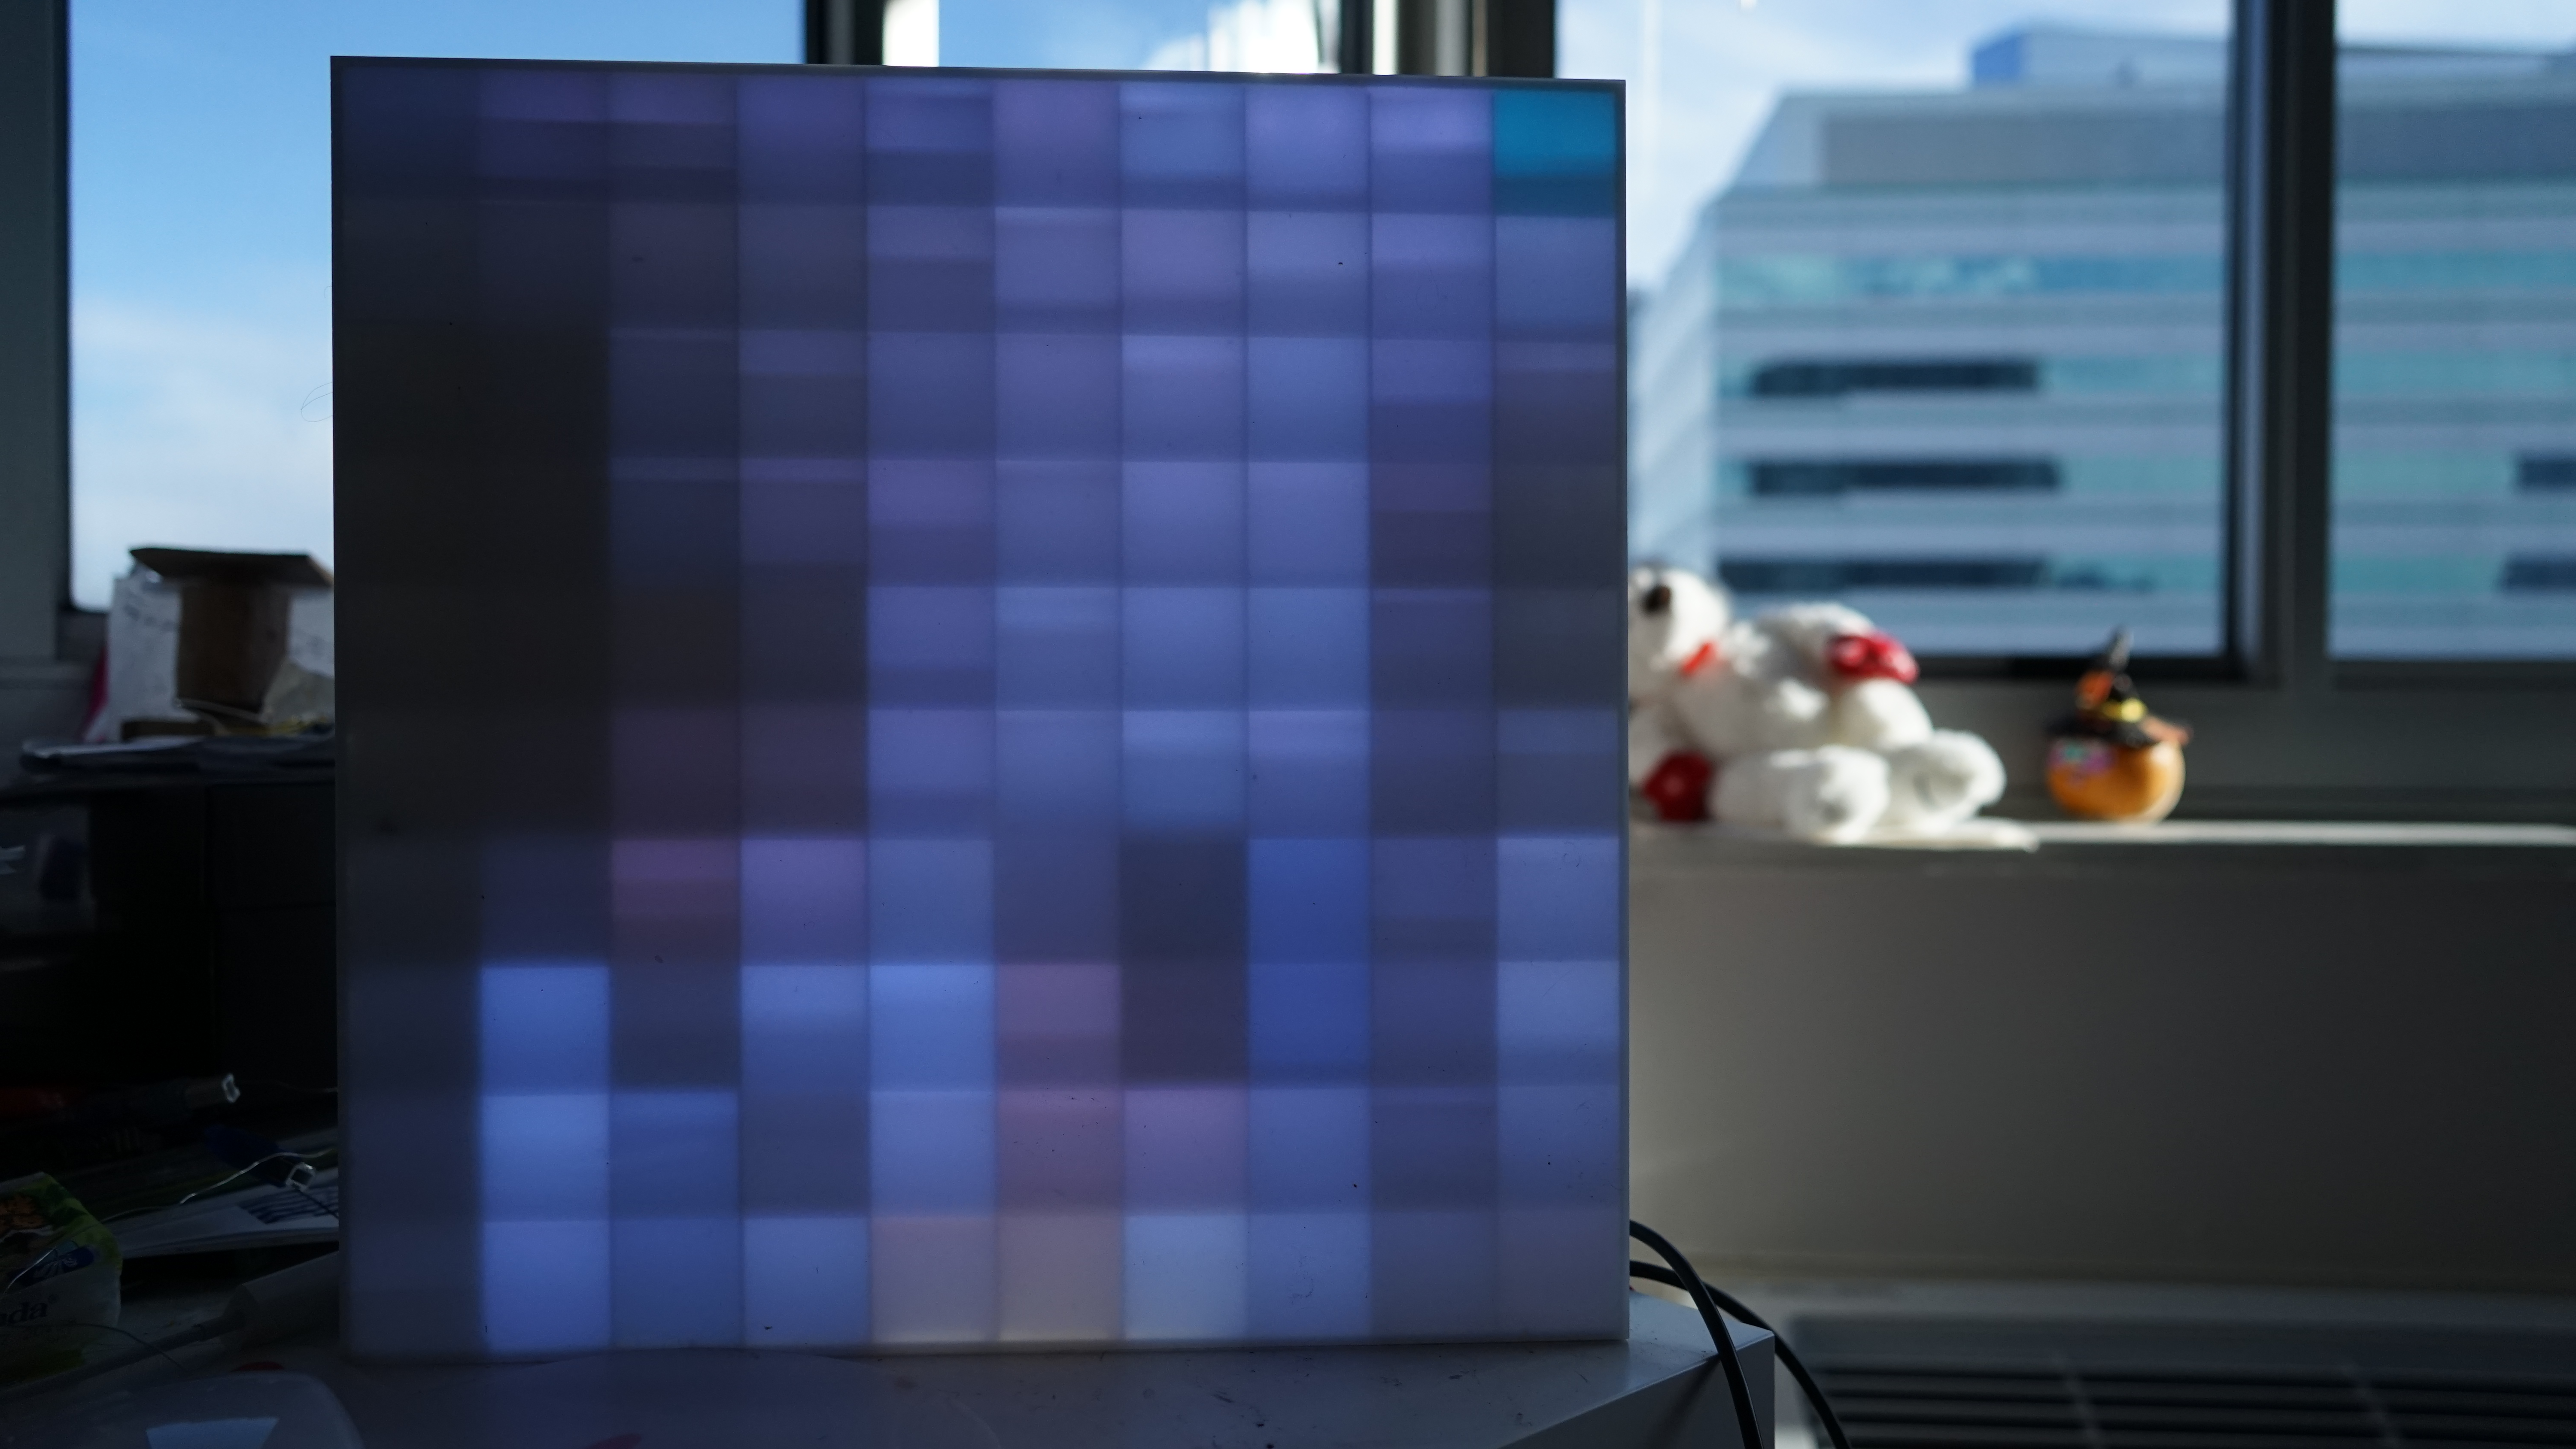 The pixel LED metric box is smart, with functional features as well as some magic.